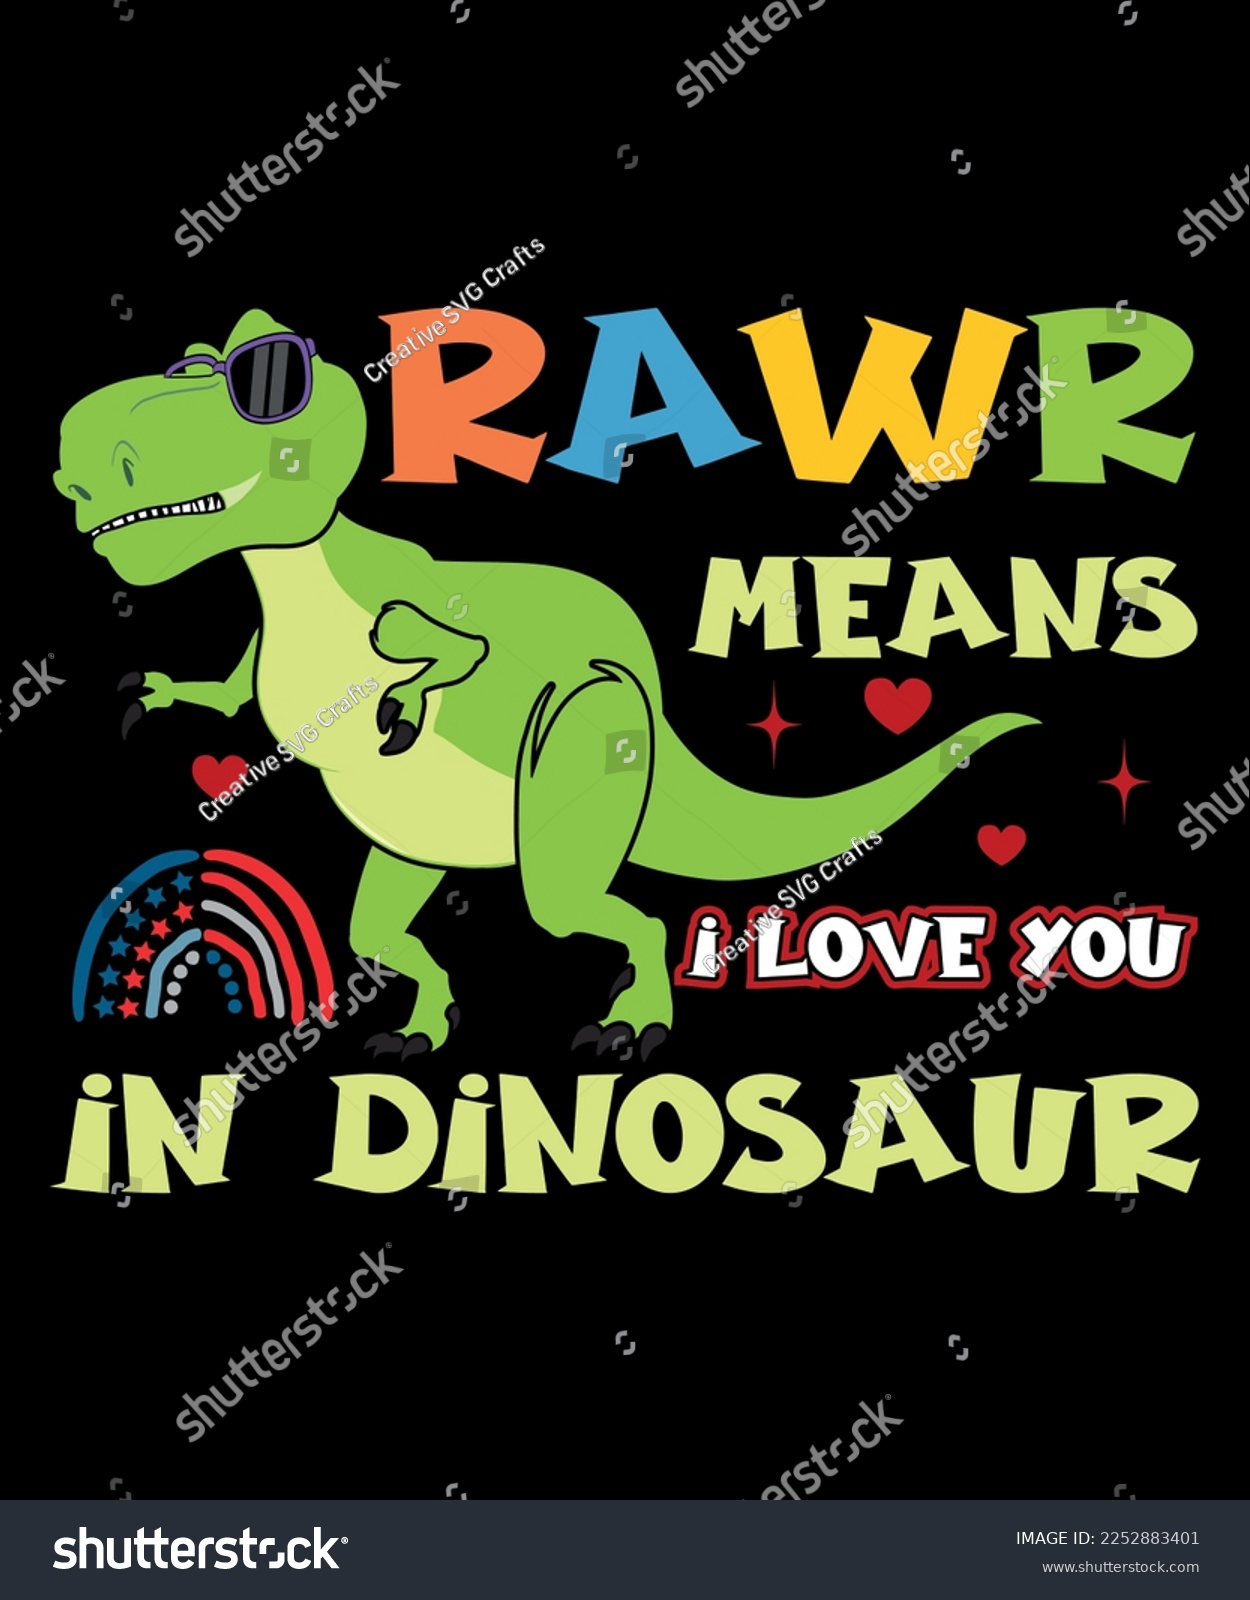 SVG of Rawr Means  i Love You In Dinosaur, 
Happy valentine's shirt print template, 14 February typography design svg